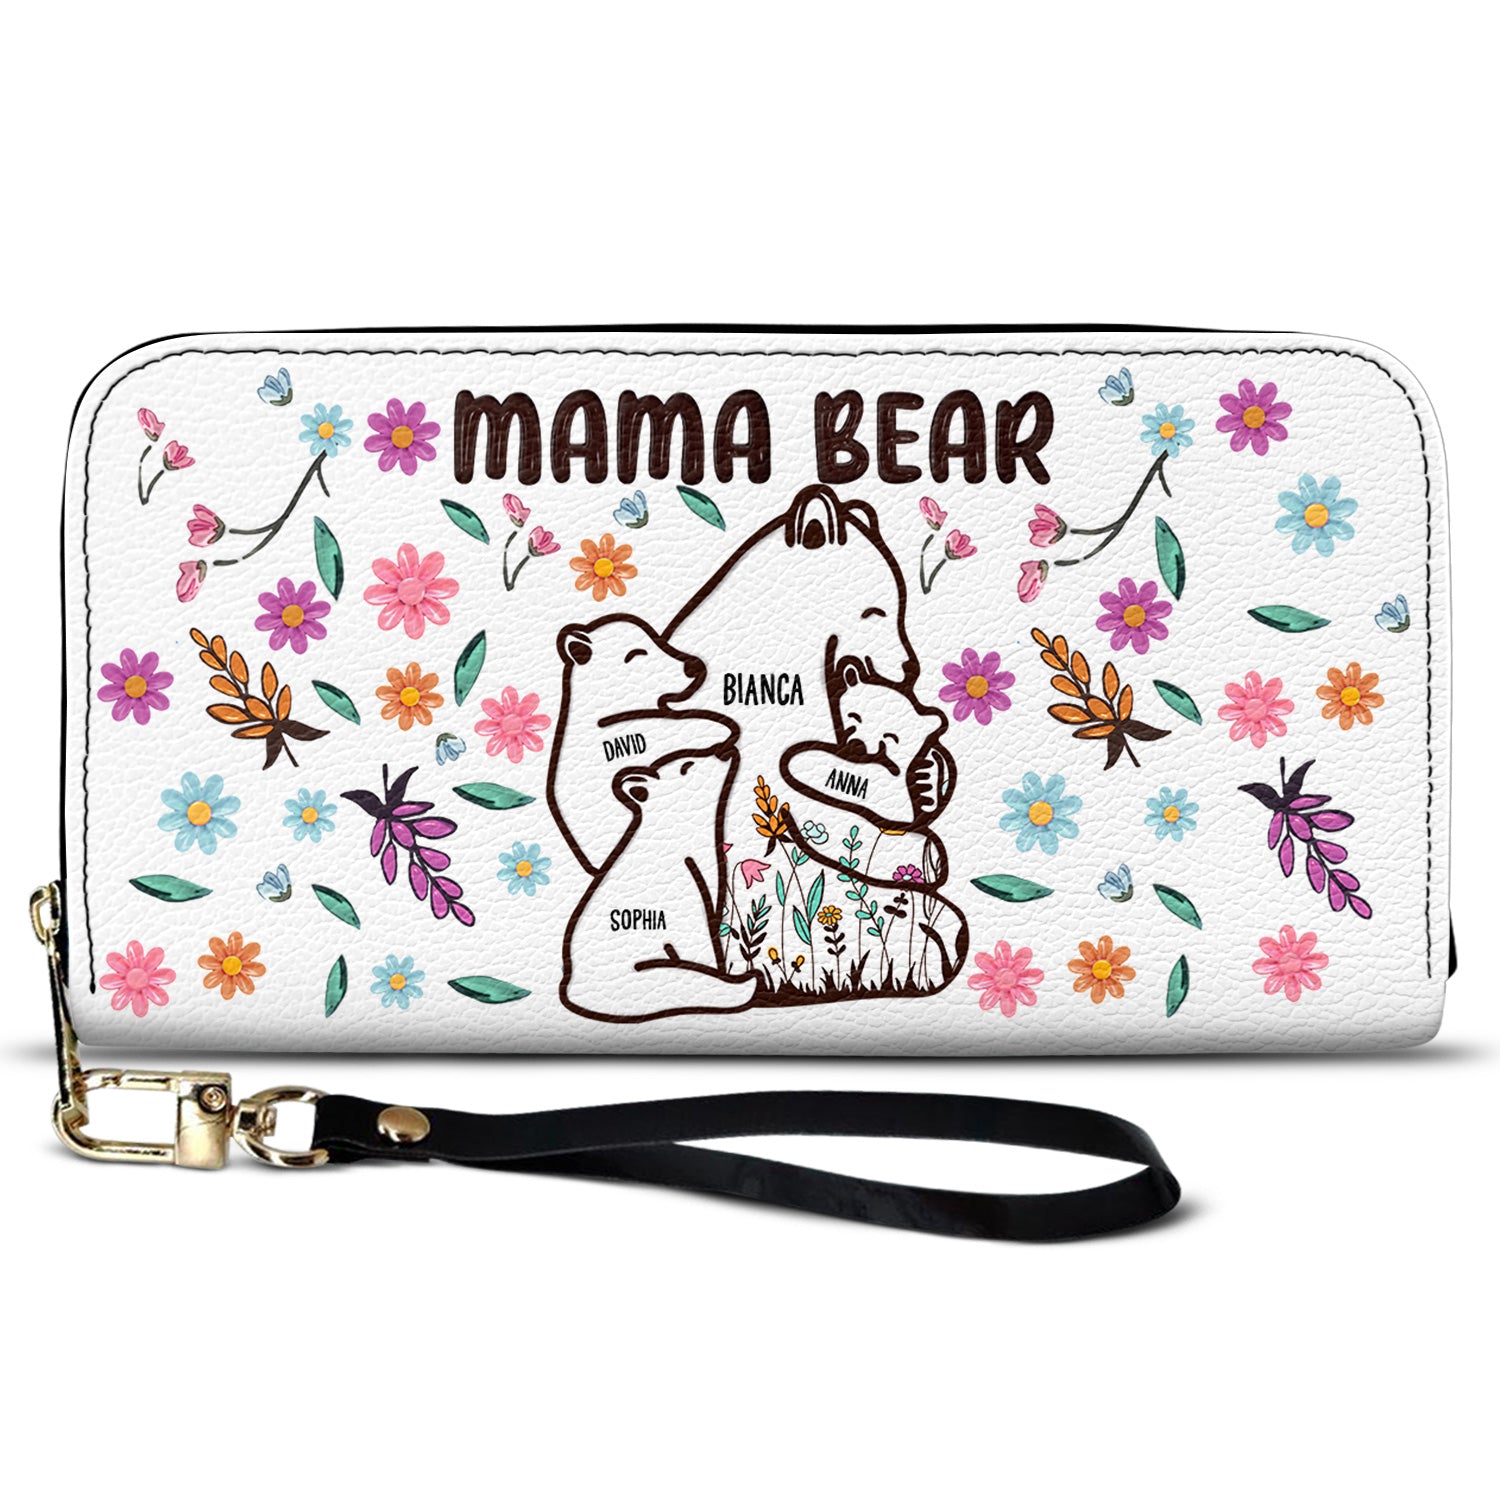 Mama Bear Floral Style - Birthday, Loving Gift For Mom, Mother, Grandma, Grandmother - Personalized Leather Long Wallet